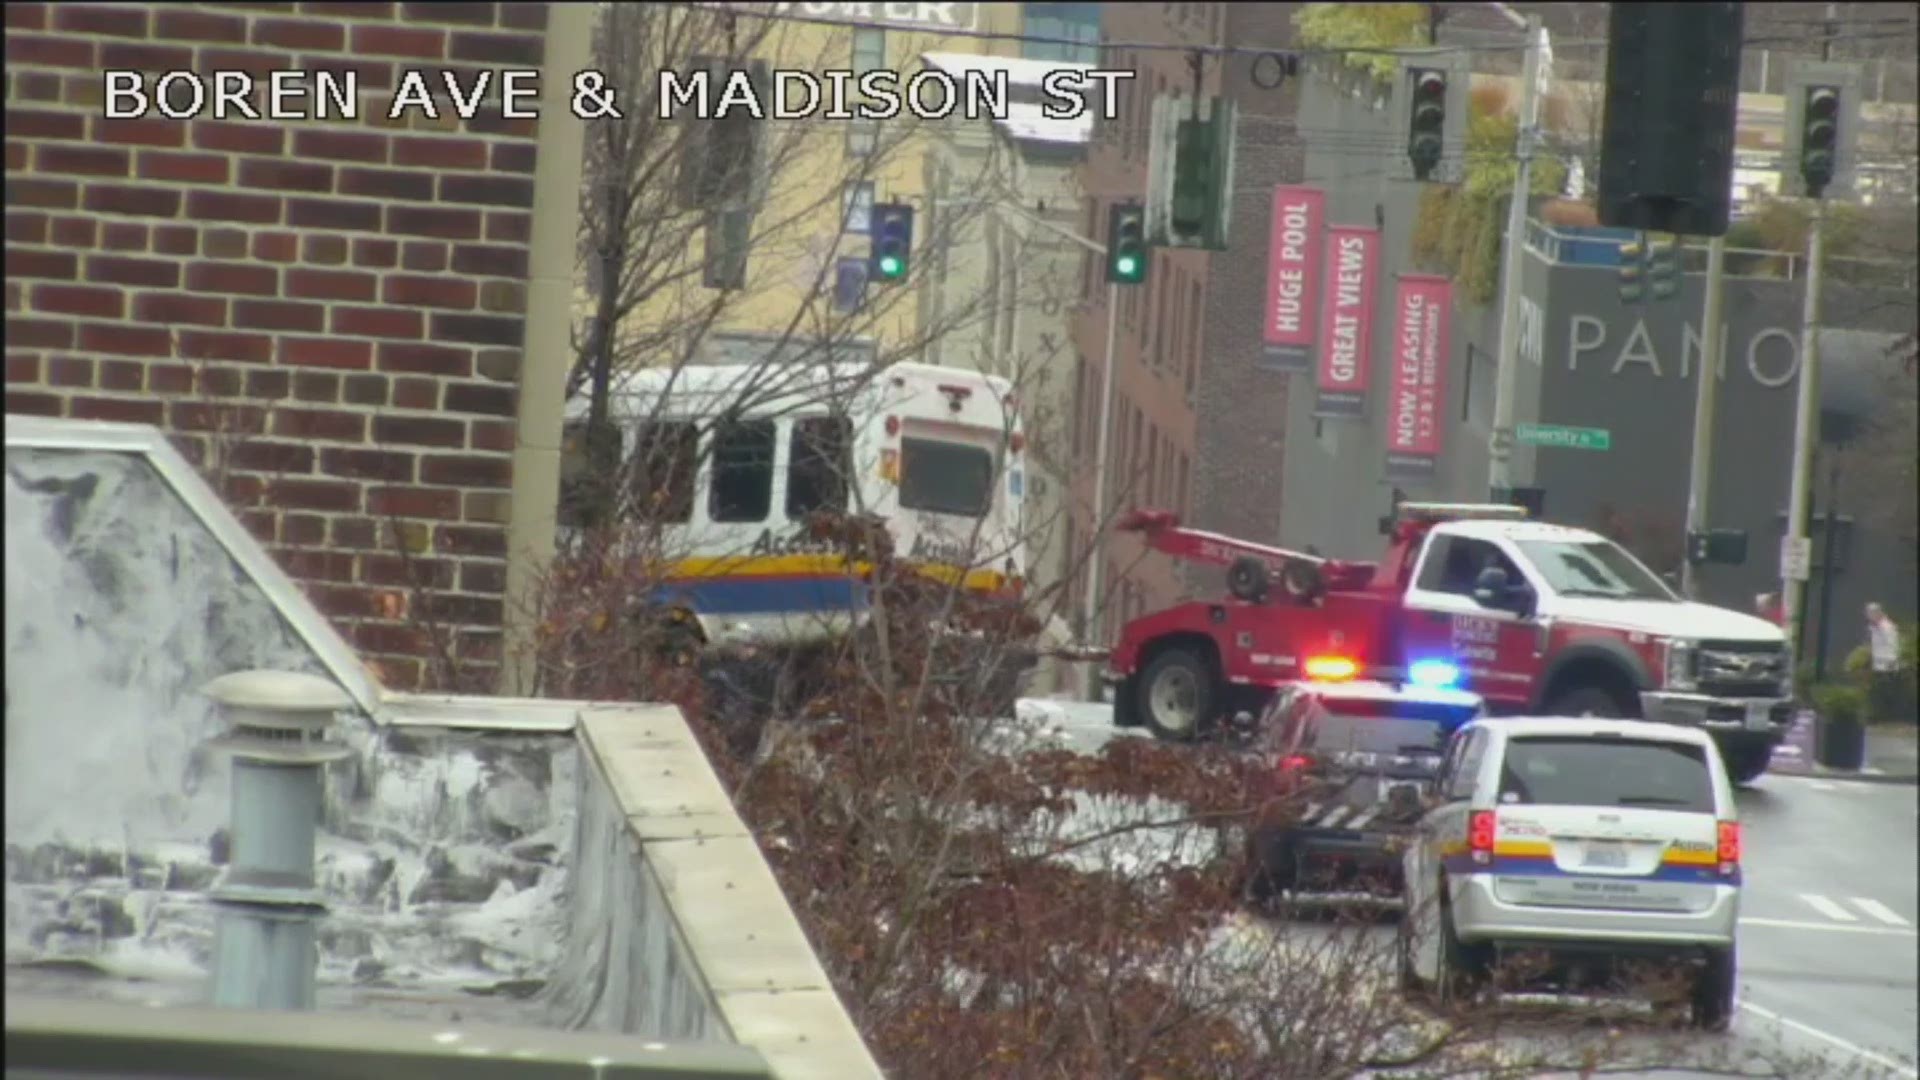 Video from a Seattle Department of Transportation camera shows a King County Metro bus being towed away after it crashed into a building.